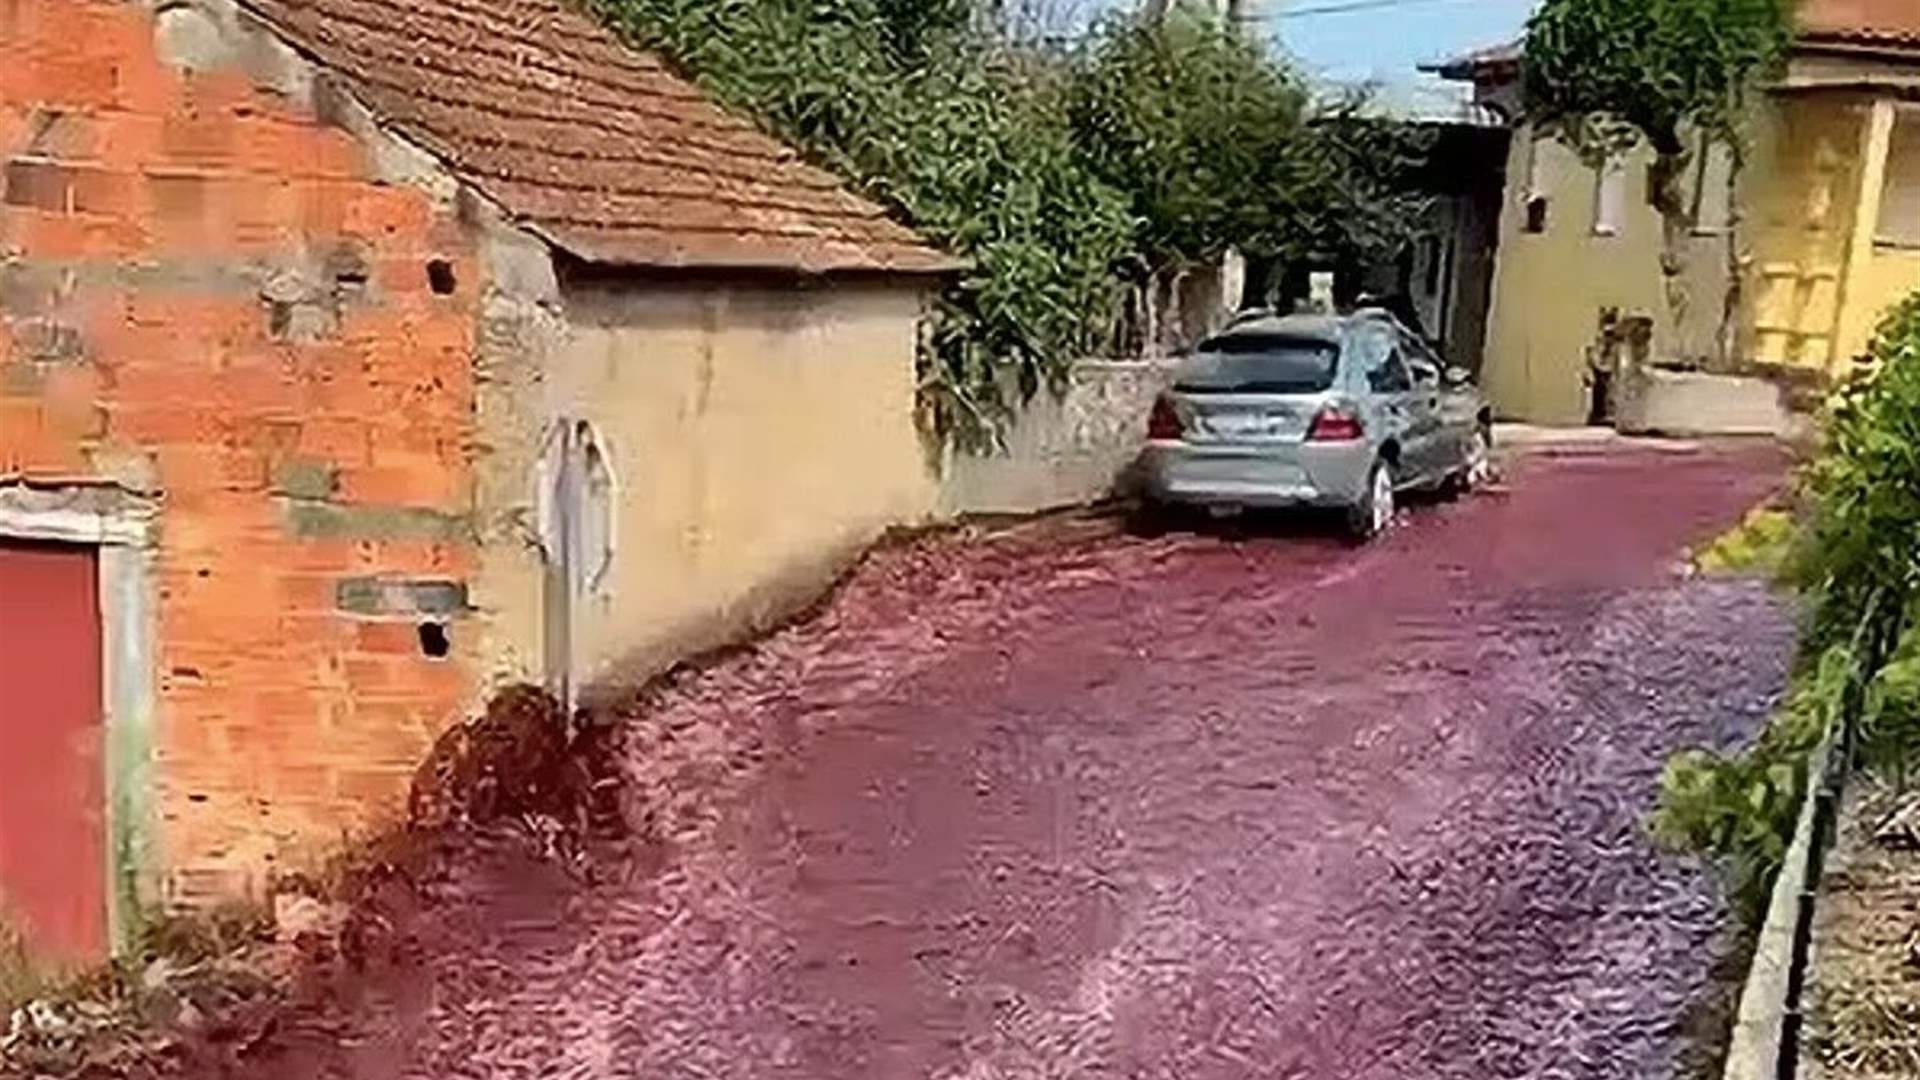 Wine floods the streets of a village in Portugal